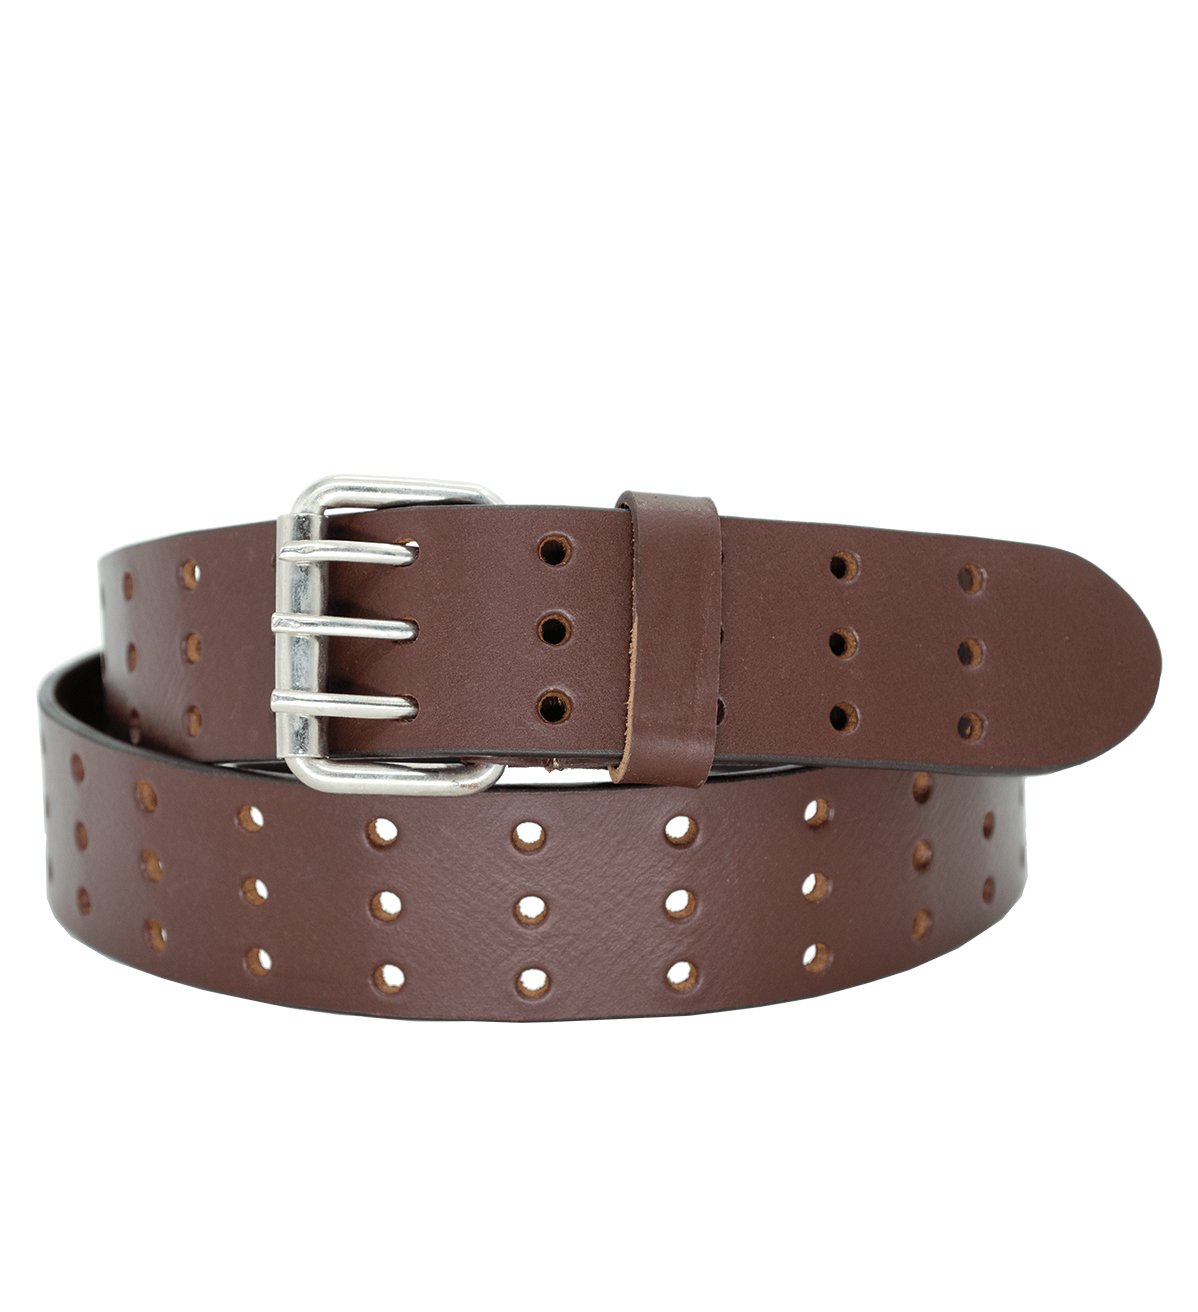 Men's 3 Pin Holes Casual Leather Belt with Heavy Silver Buckle - #BT-1609